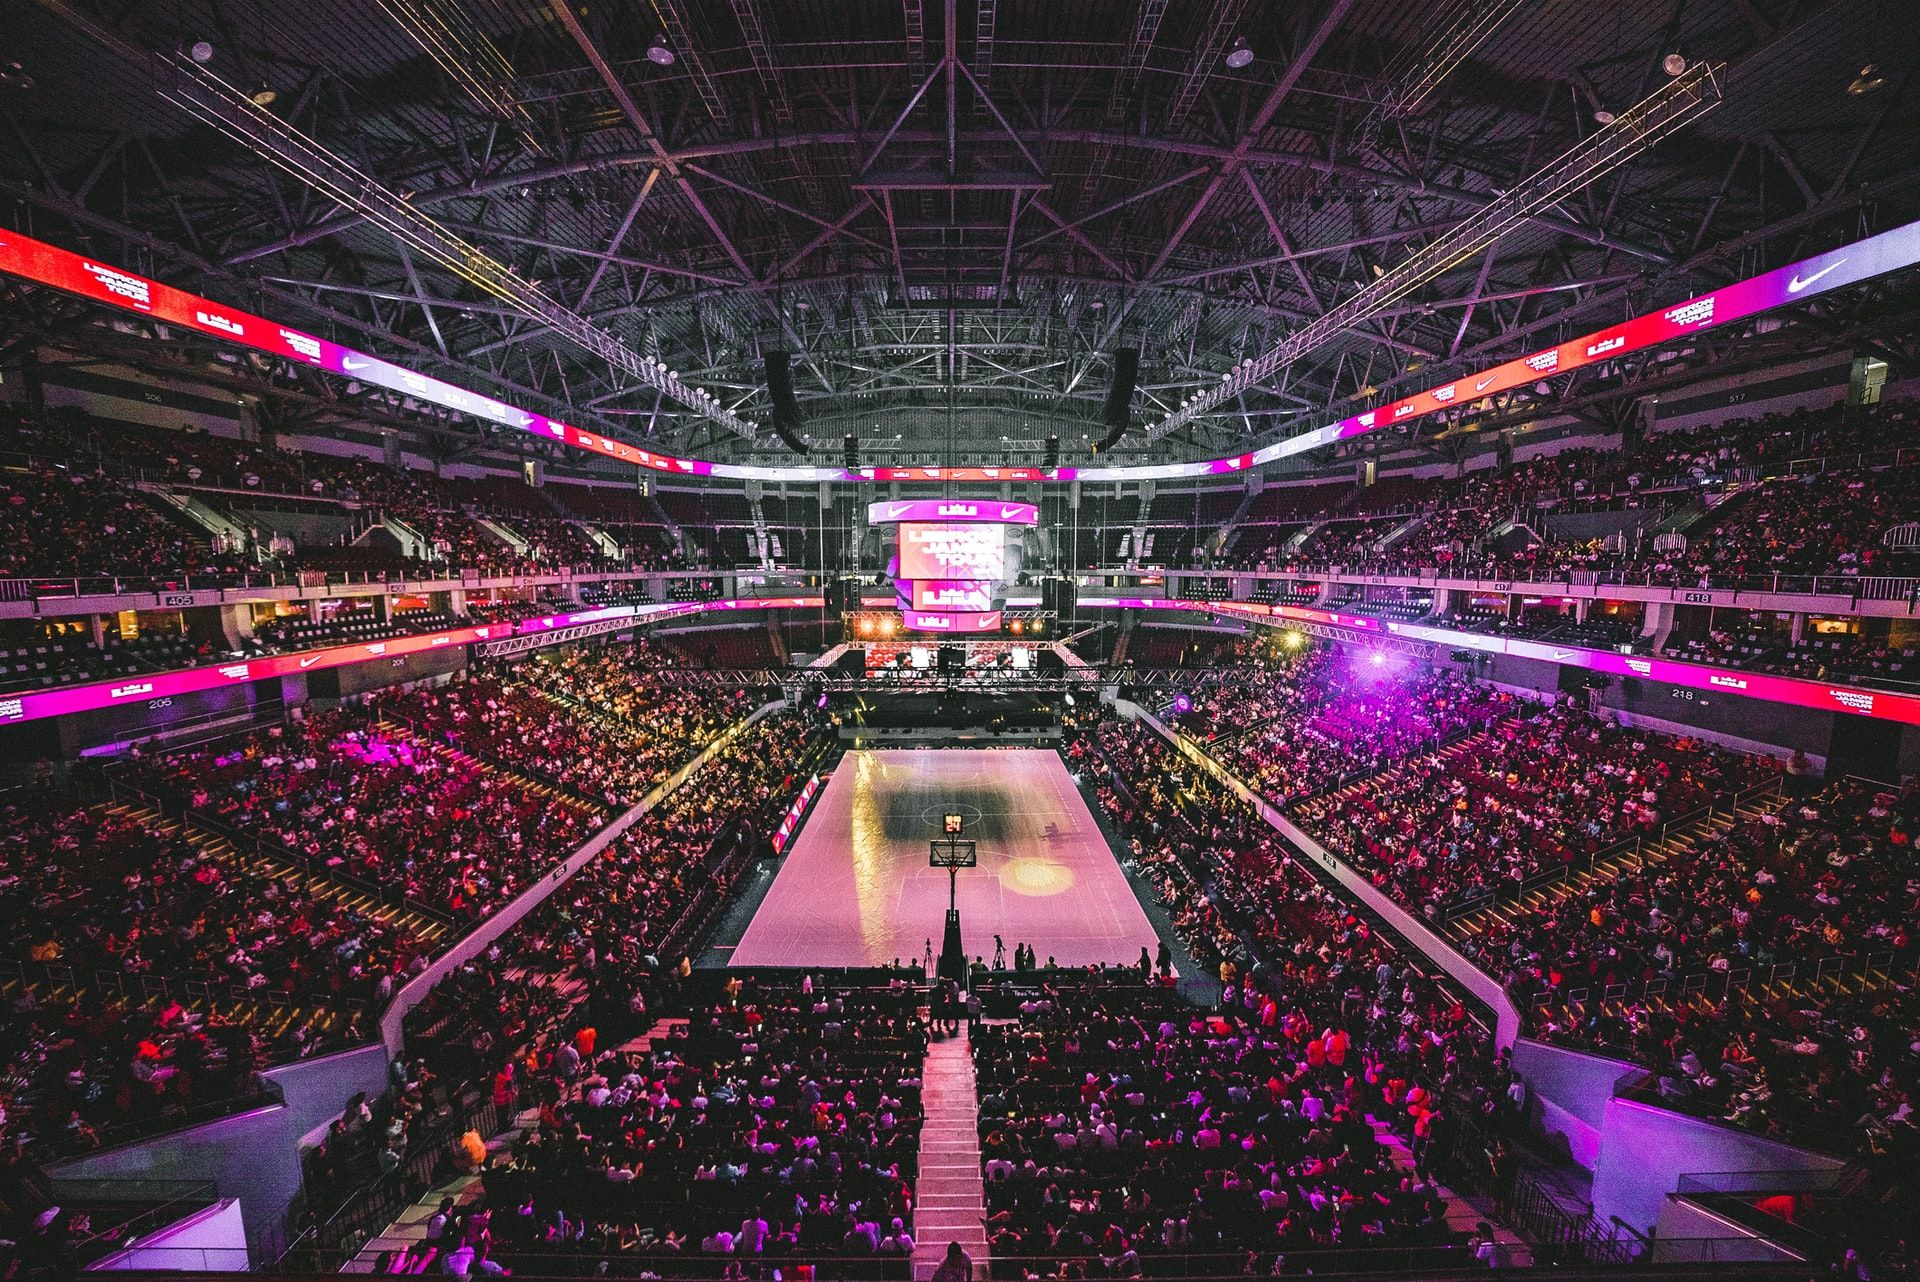 Arena filled with fans before a basketball game